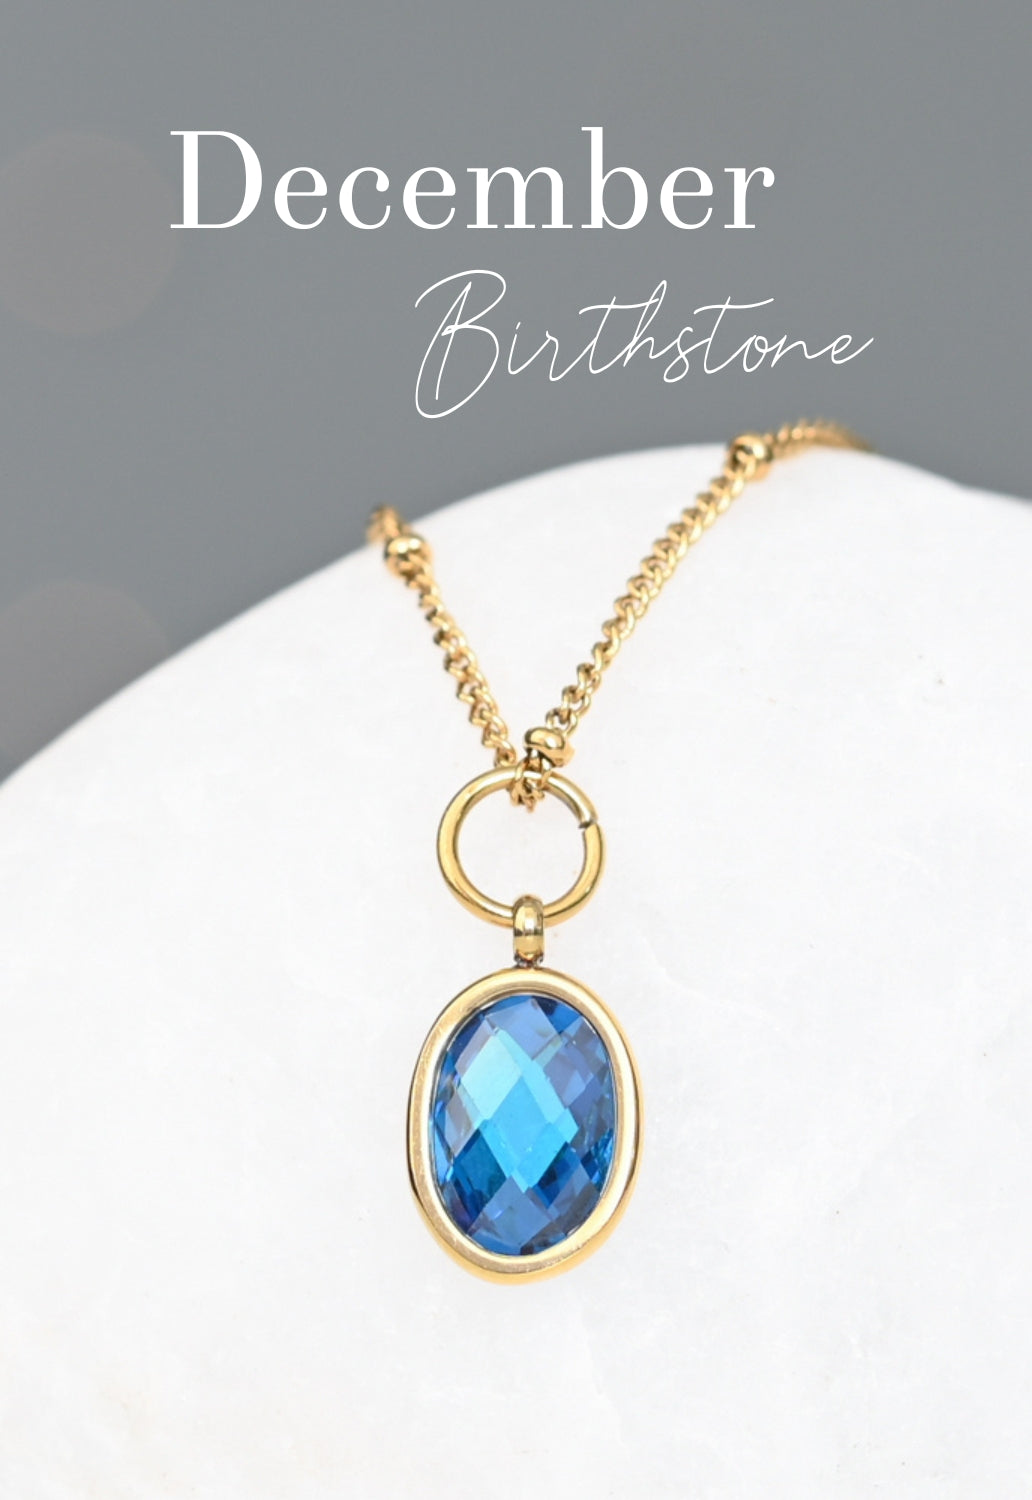 Birthstone Necklace - Two Charms